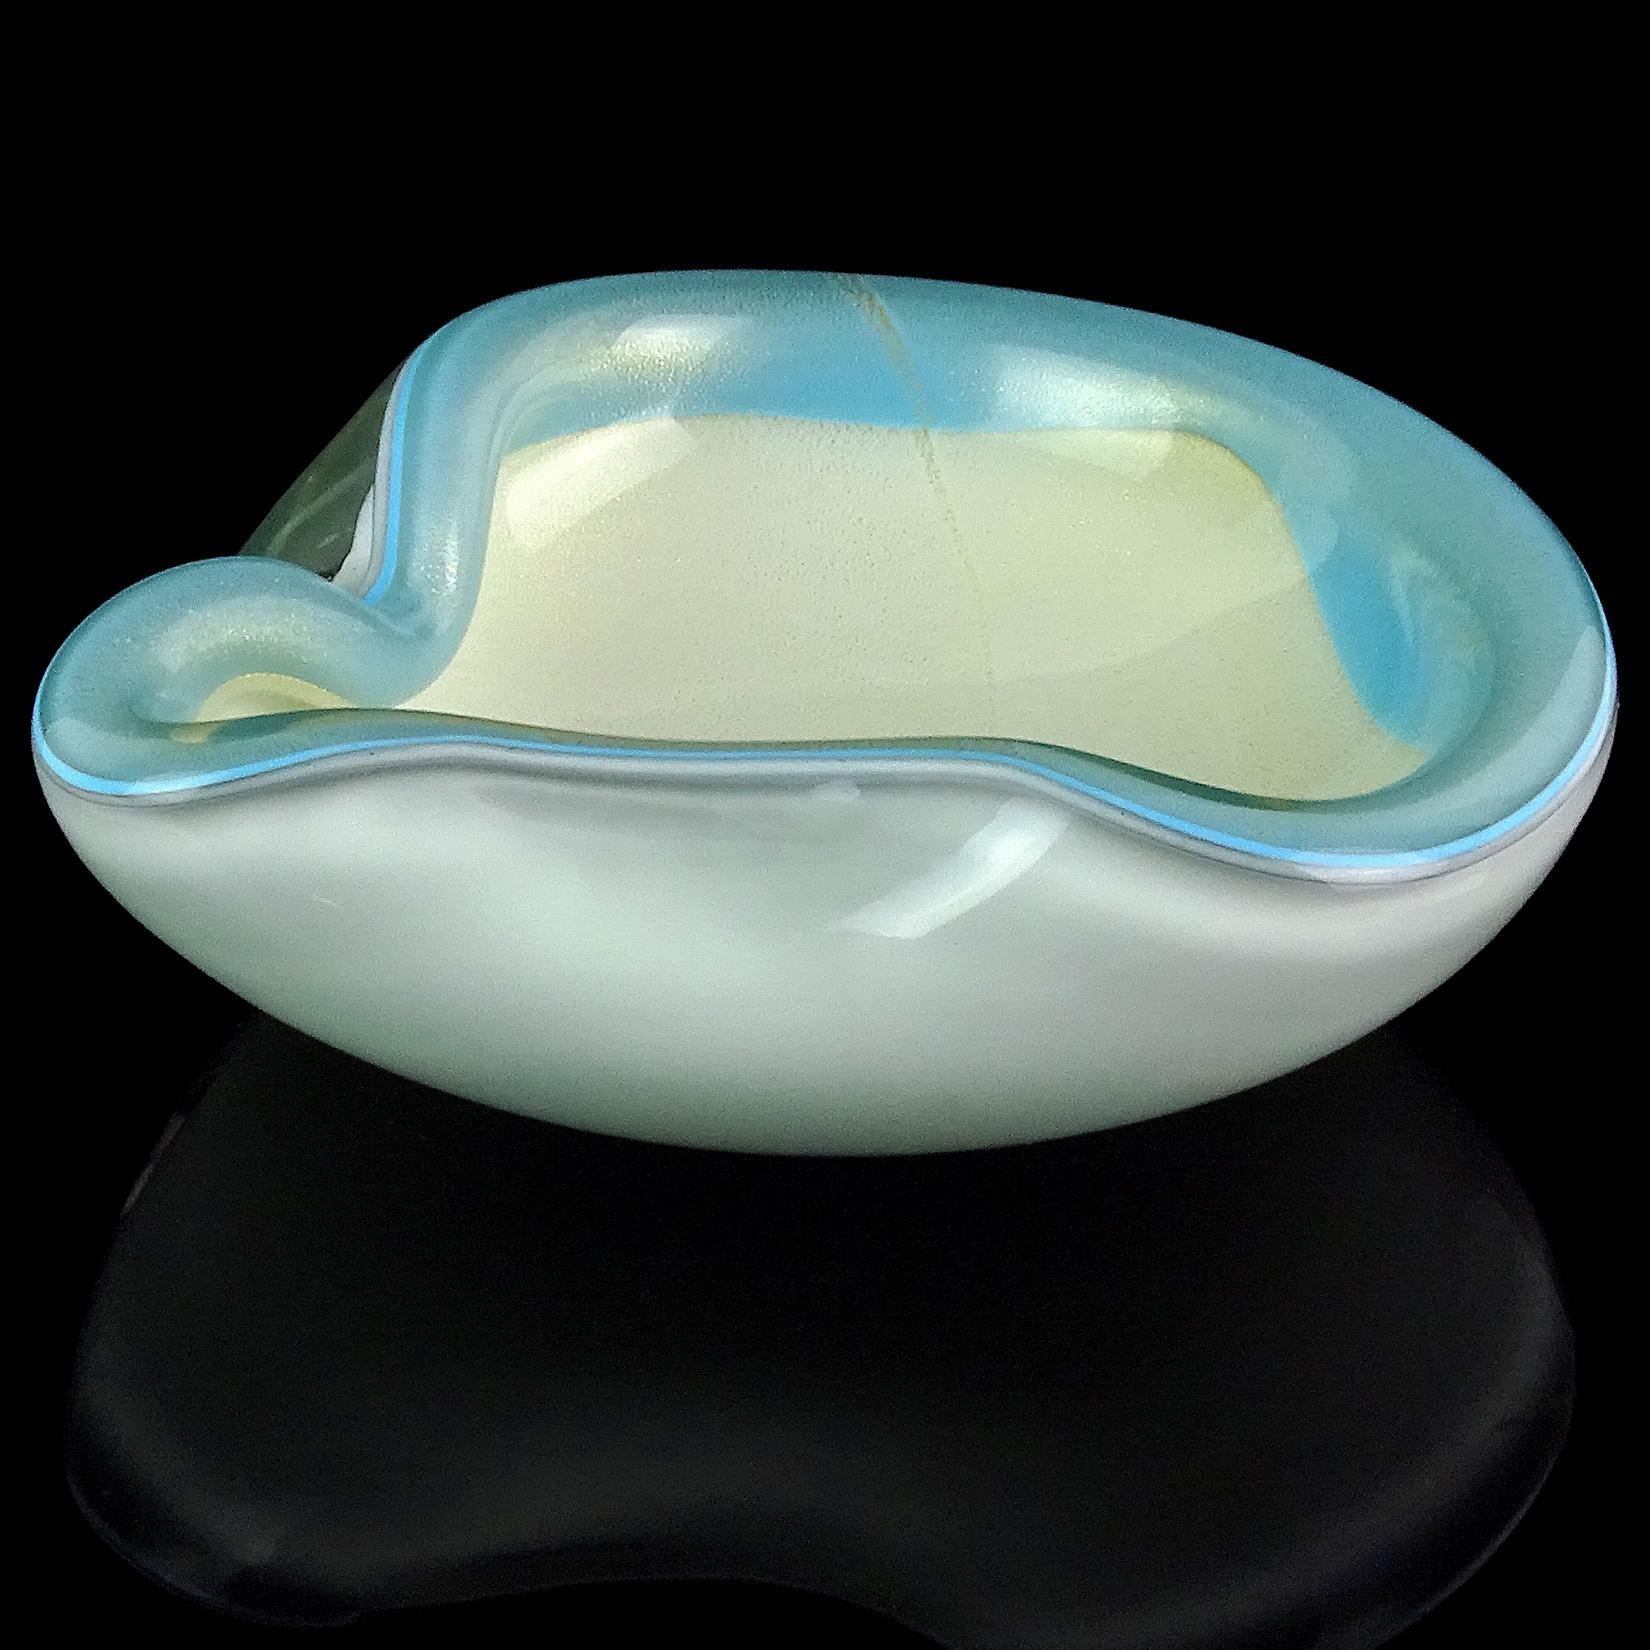 Beautiful vintage Murano hand blown white and gold flecks Italian art glass bowl with blue decoration around the rim. Documented to designer Alfredo Barbini. The piece is profusely covered in gold leaf. Can be used as a display piece on any table.